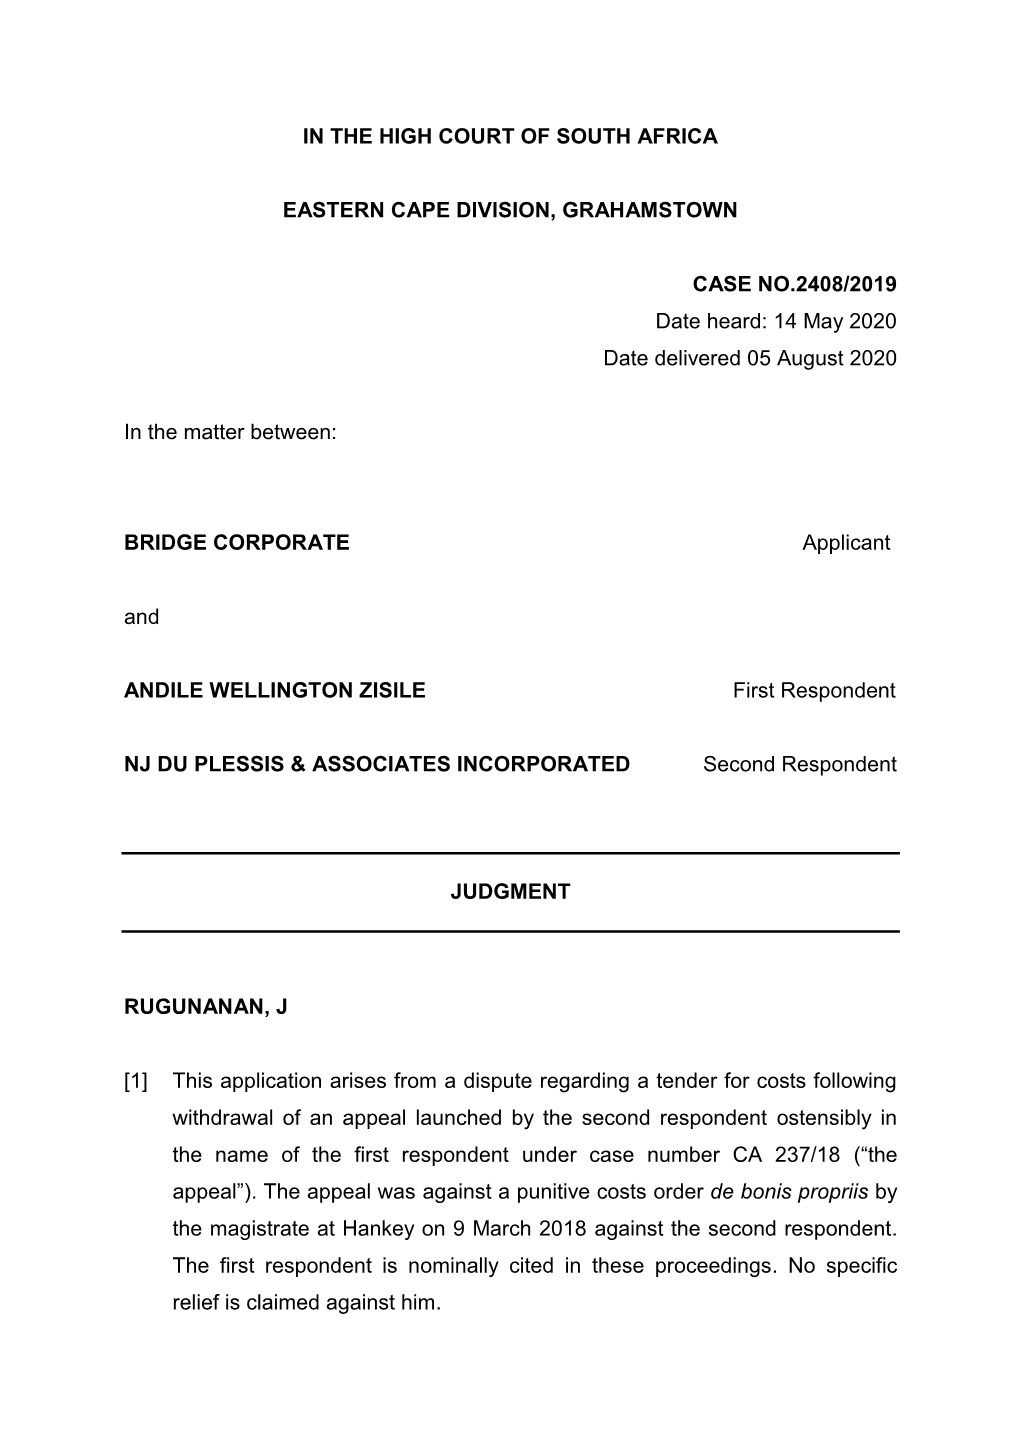 IN the HIGH COURT of SOUTH AFRICA EASTERN CAPE DIVISION, GRAHAMSTOWN CASE NO.2408/2019 Date Heard: 14 May 2020 Date Delivered 05